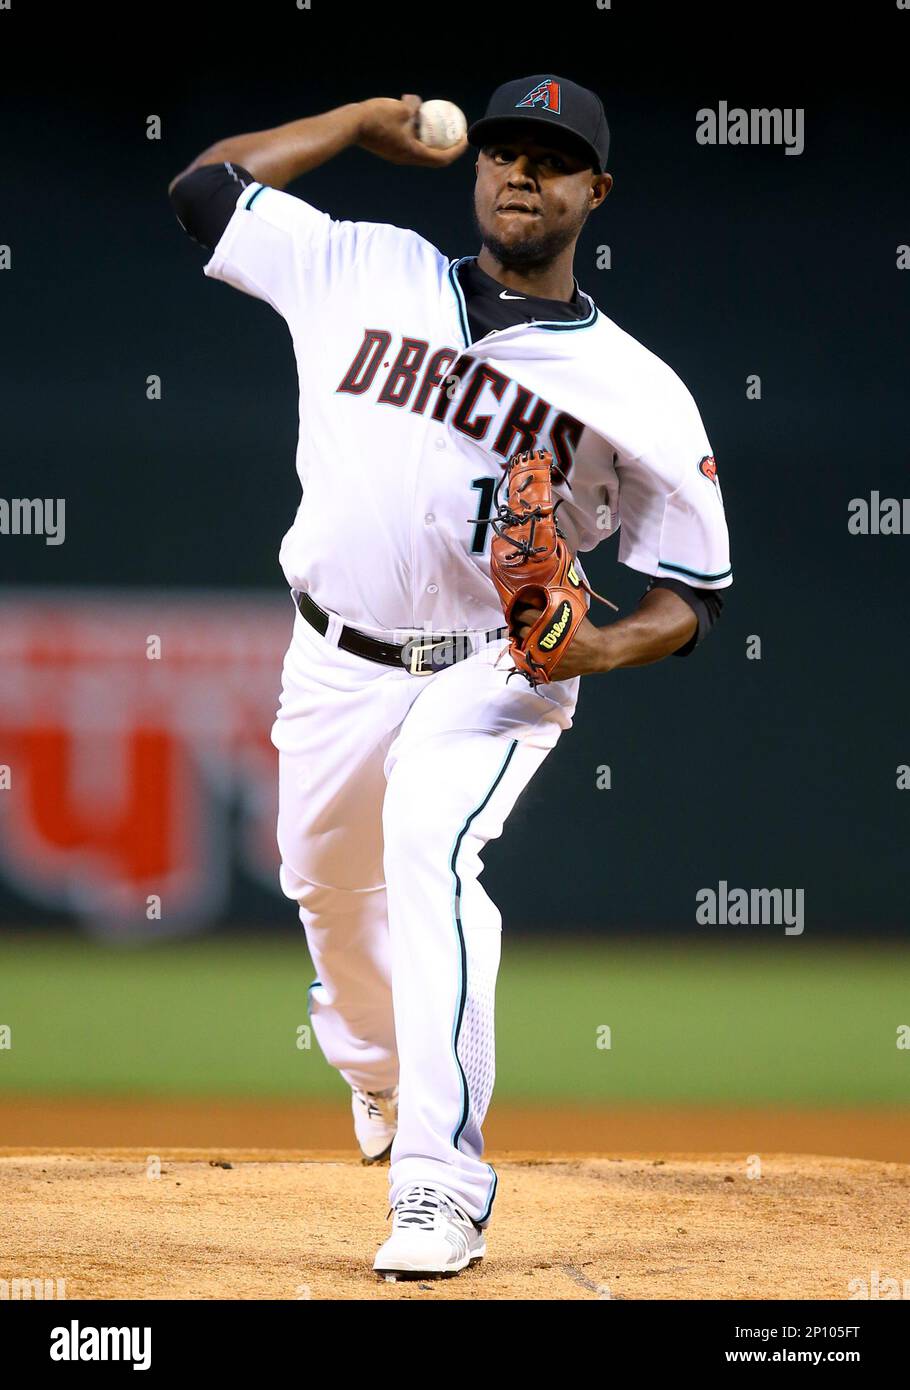 09 September 2016: Arizona Diamondbacks Outfield Mitch Haniger (19) [9872]  at bat during a game between San Francisco Giants and the Arizona  Diamondbacks at Chase field. (Photo by Kevin French/Icon Sportswire) (Icon